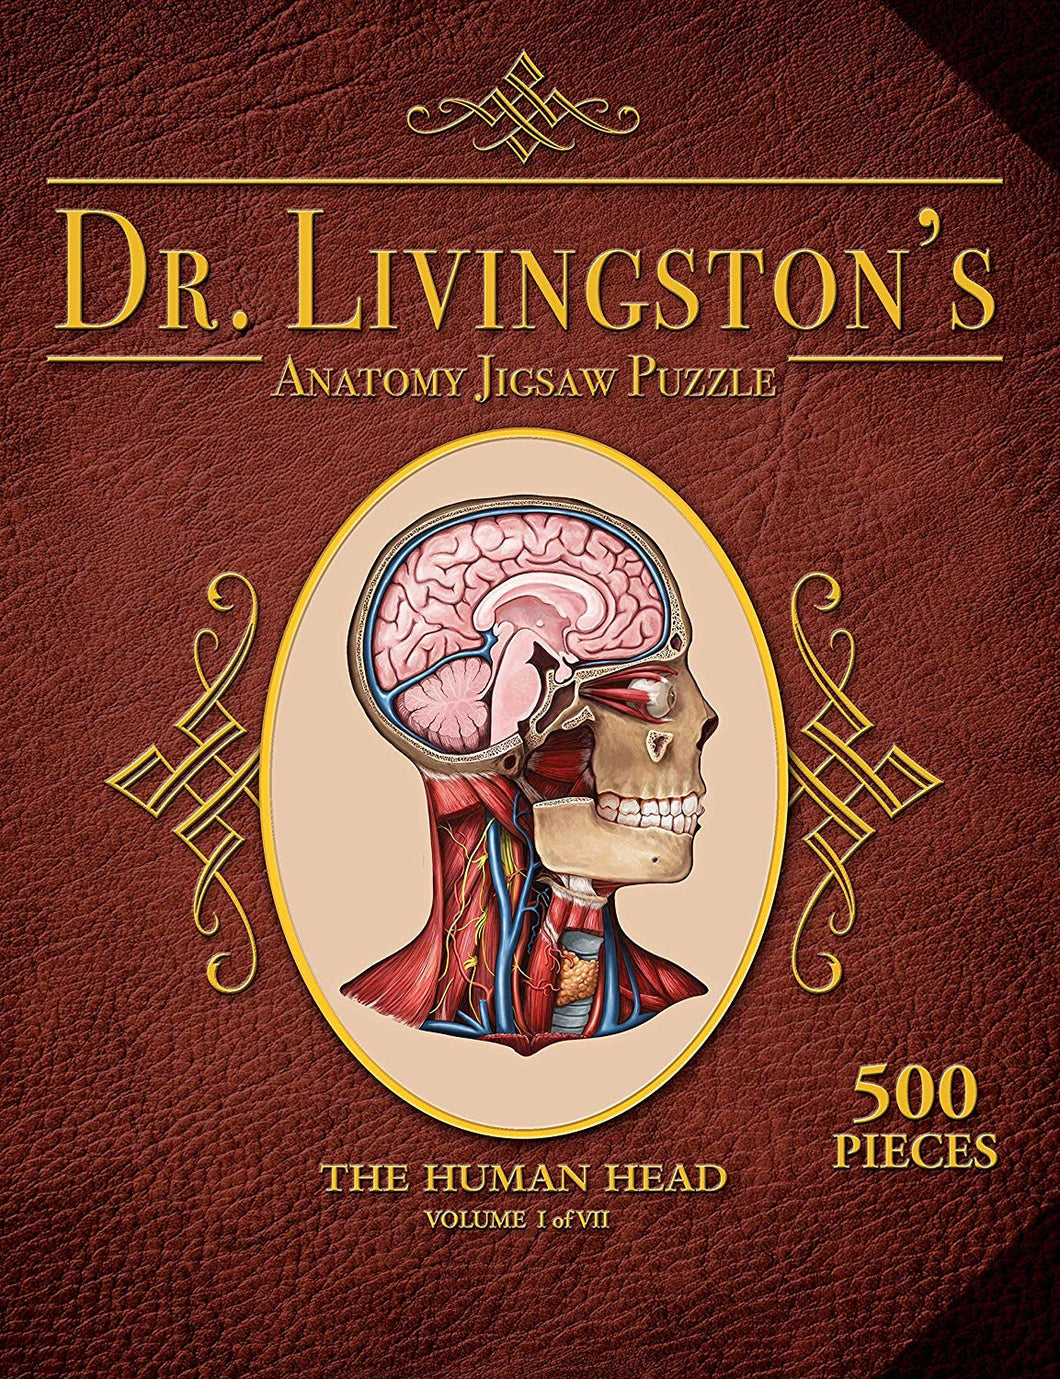 Dr. Livingston's Anatomy the Human Head Puzzle 500 pieces